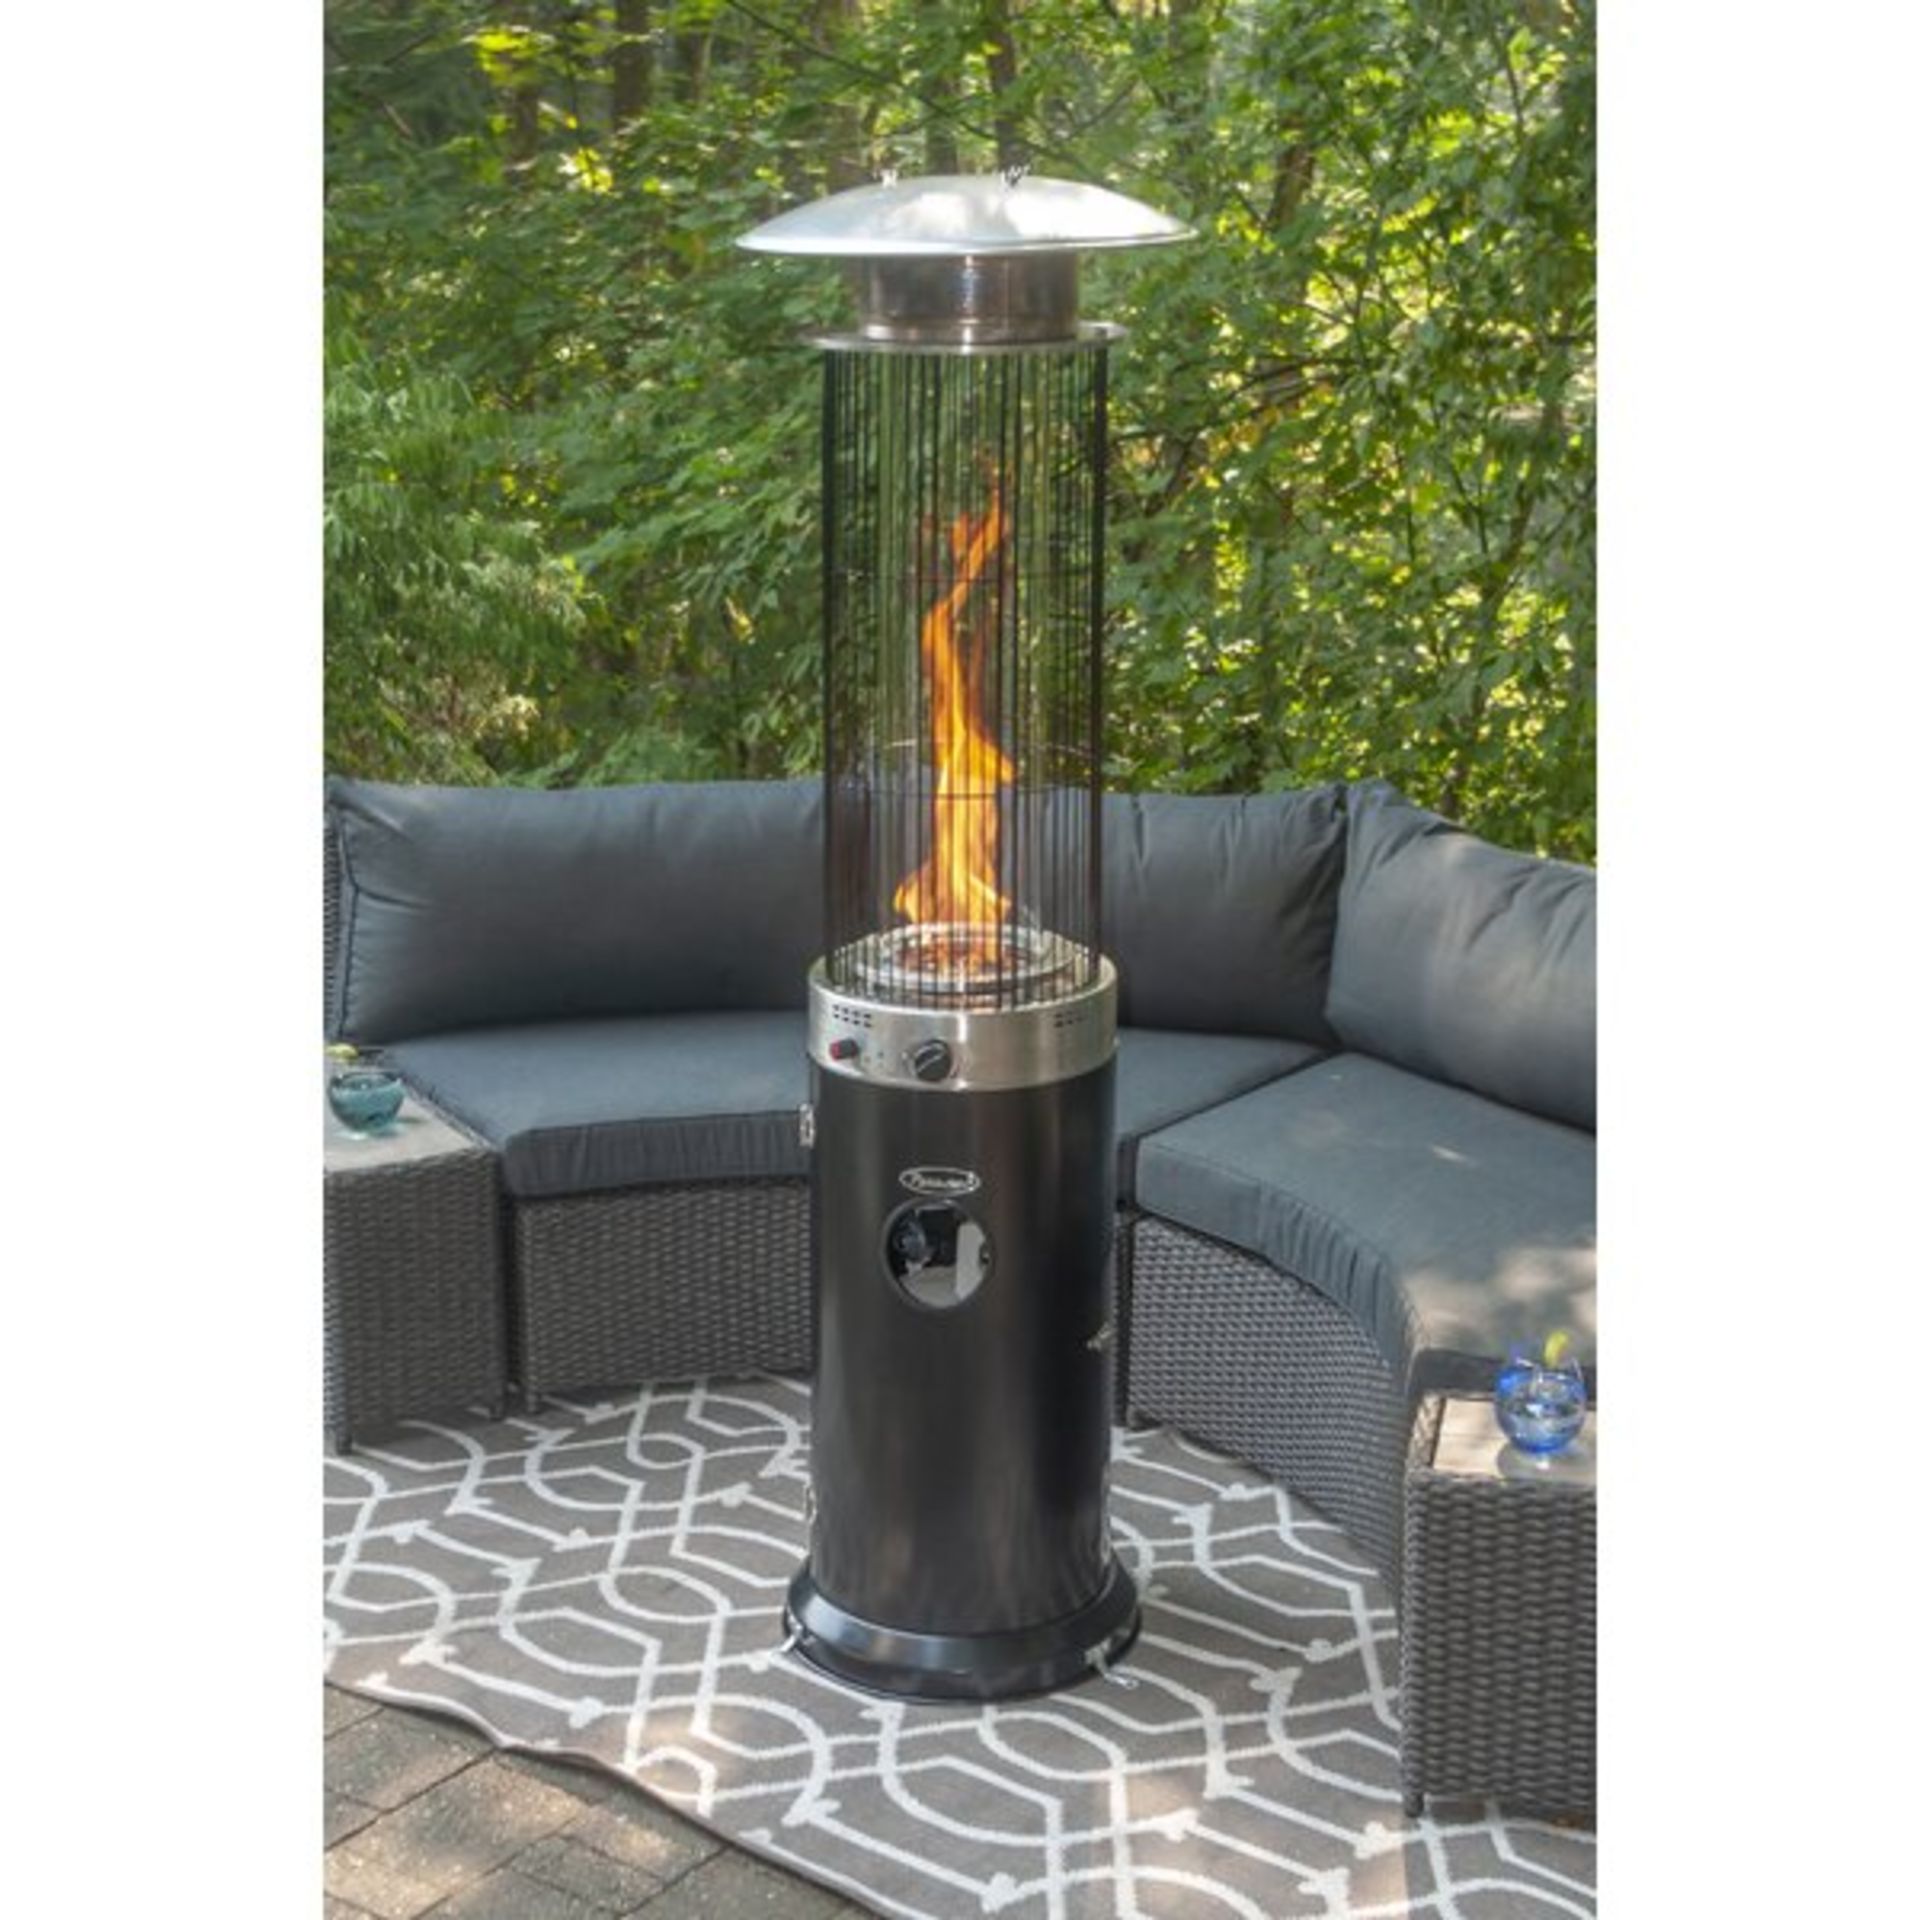 + VAT Brand New Chelsea Garden Company Wheeled Garden Gas Patio Heater With Cover - Item Is